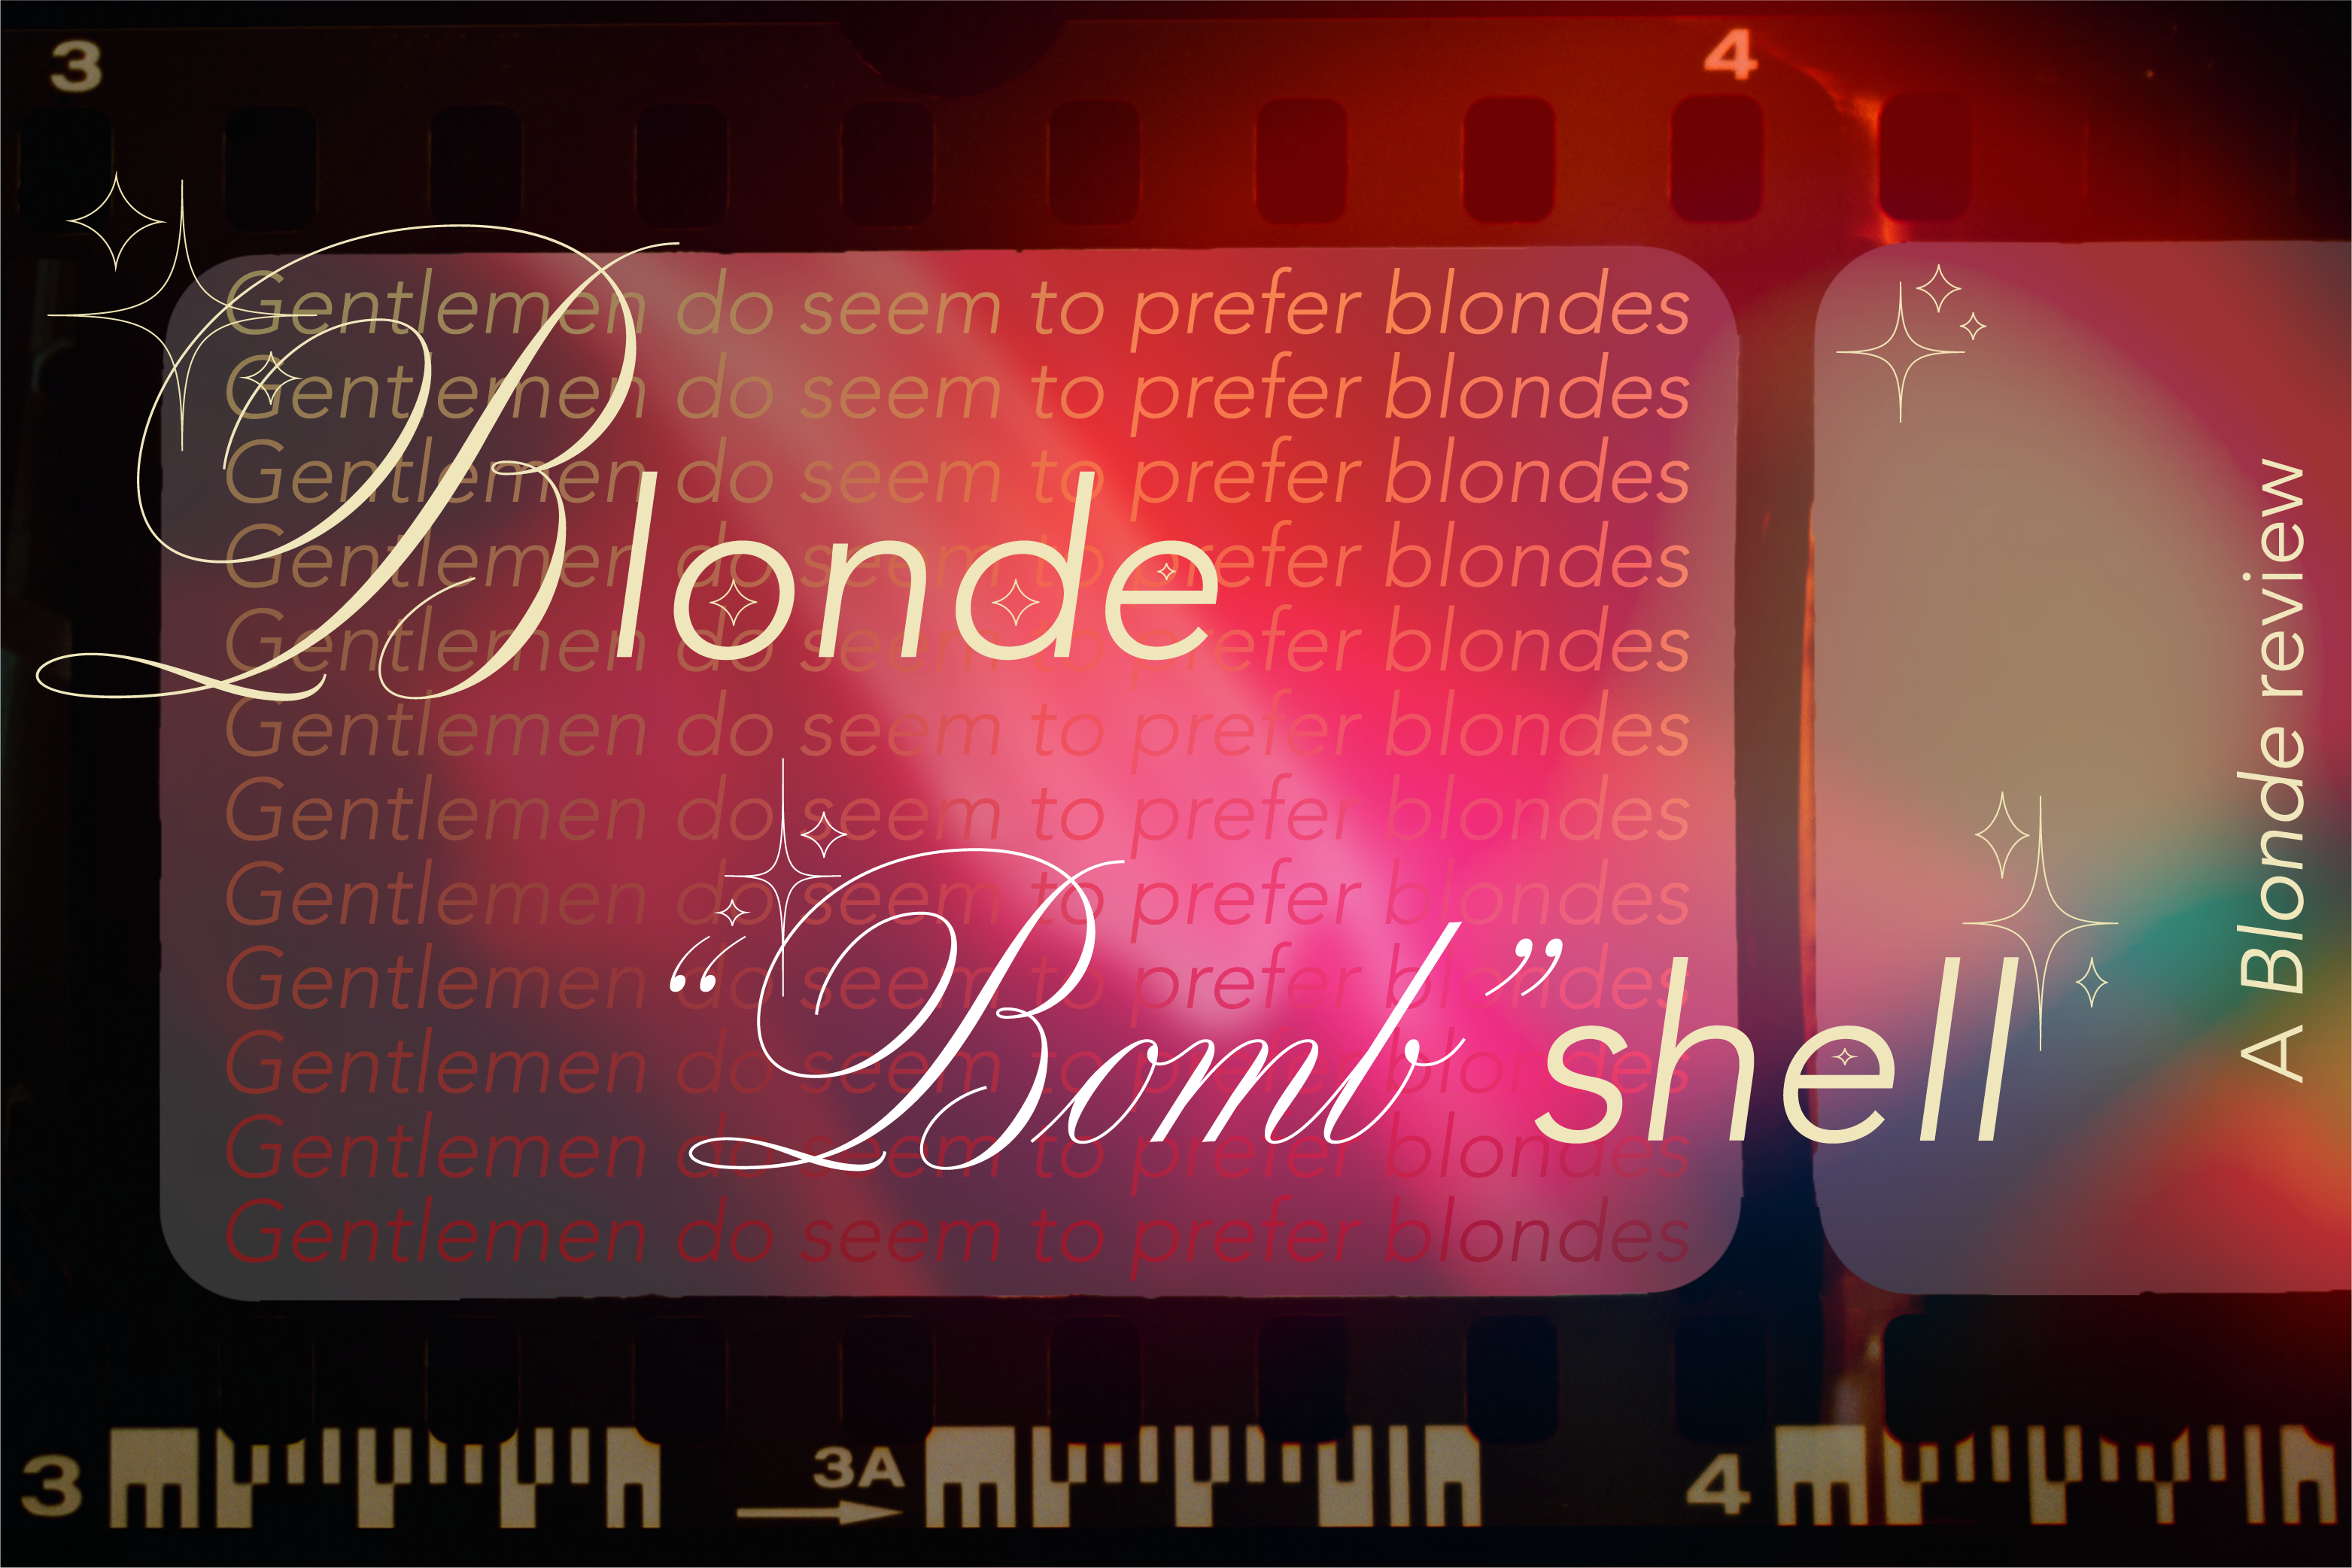 https://scadmanor.com/wp-content/uploads/2022/10/Blonde-_Bomb_shell-article-graphics.png